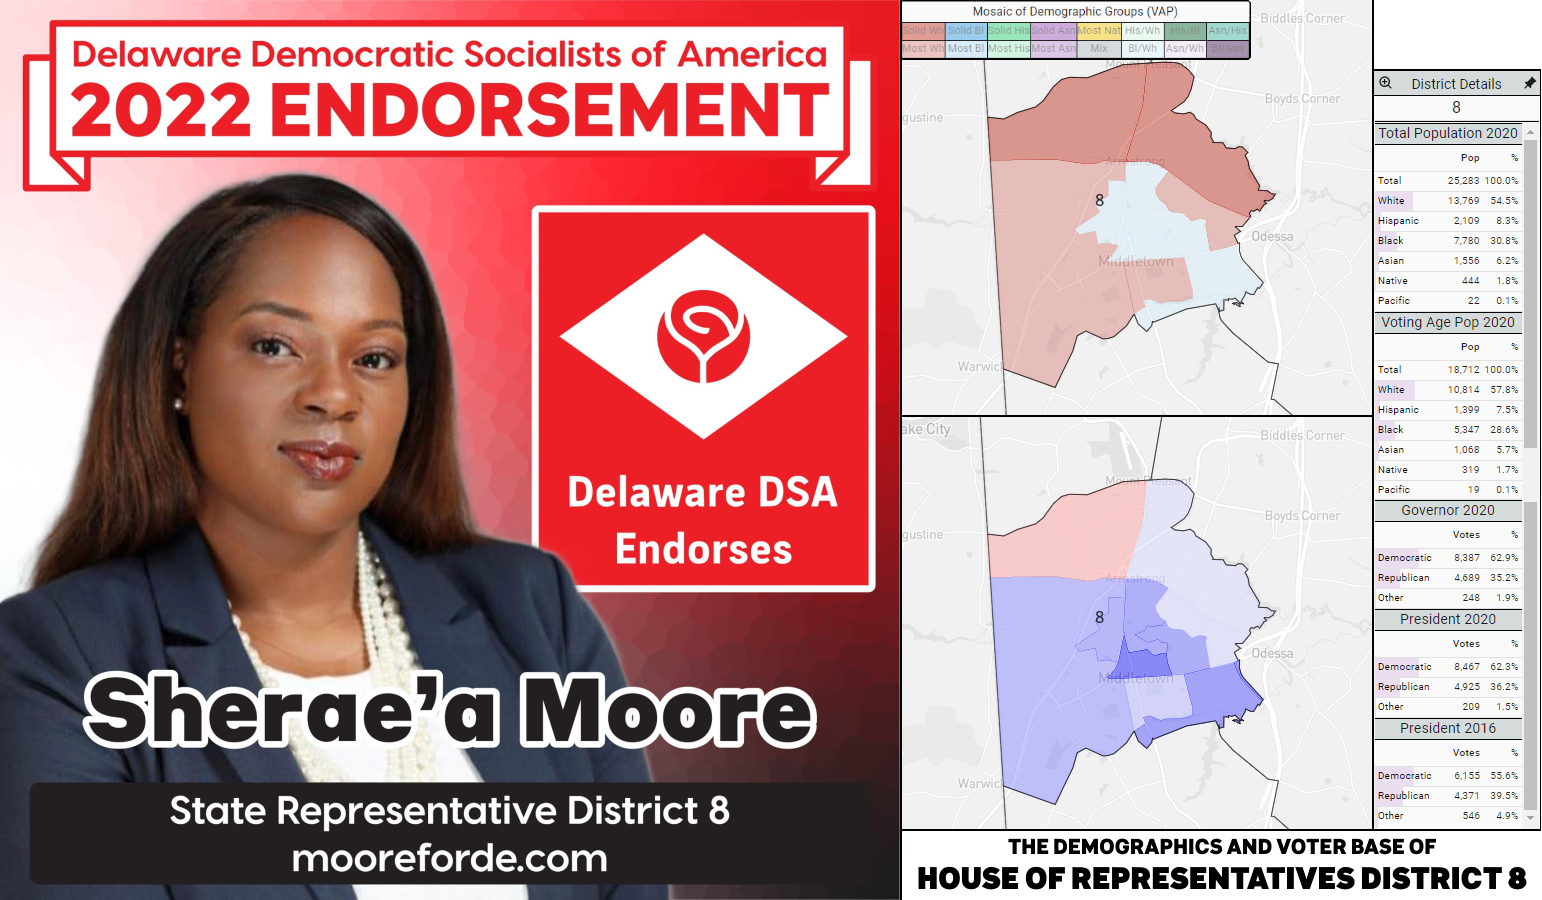 Sherae'a Moore's endorsement graphic (she/her; left) and a graphic of the demographics and voting base of House District 8 (right).